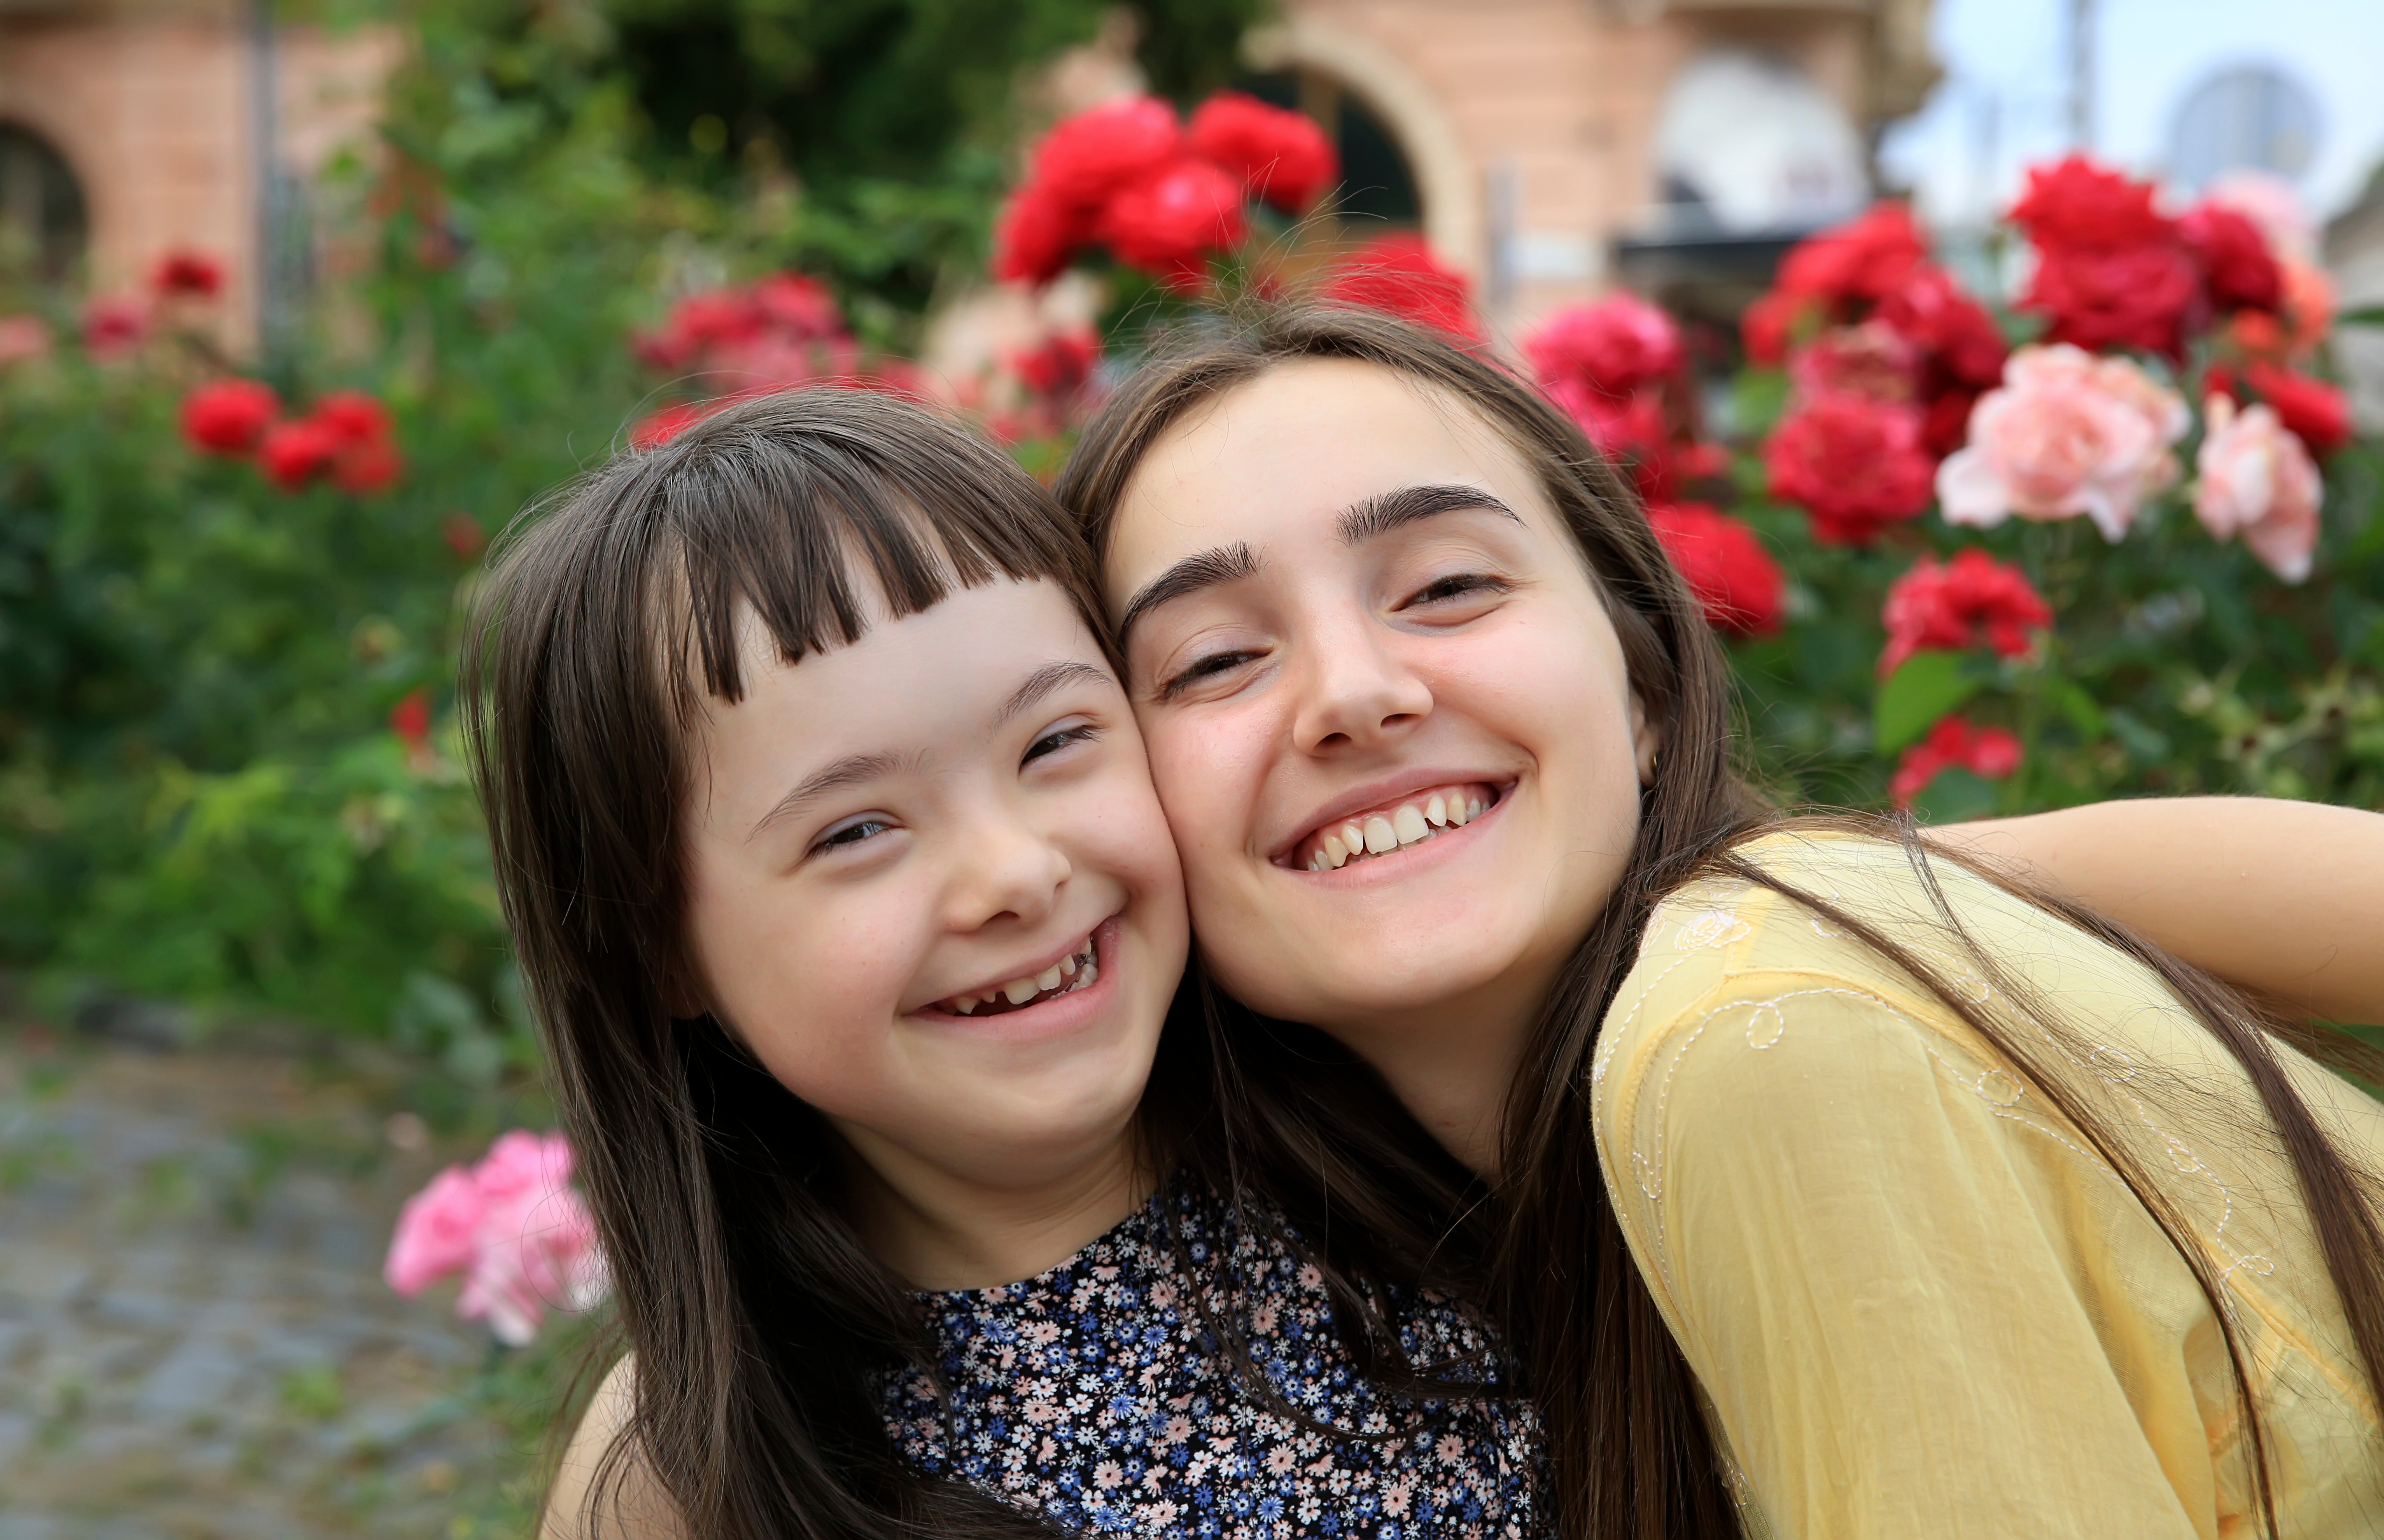 two young people hug and smile in a garden